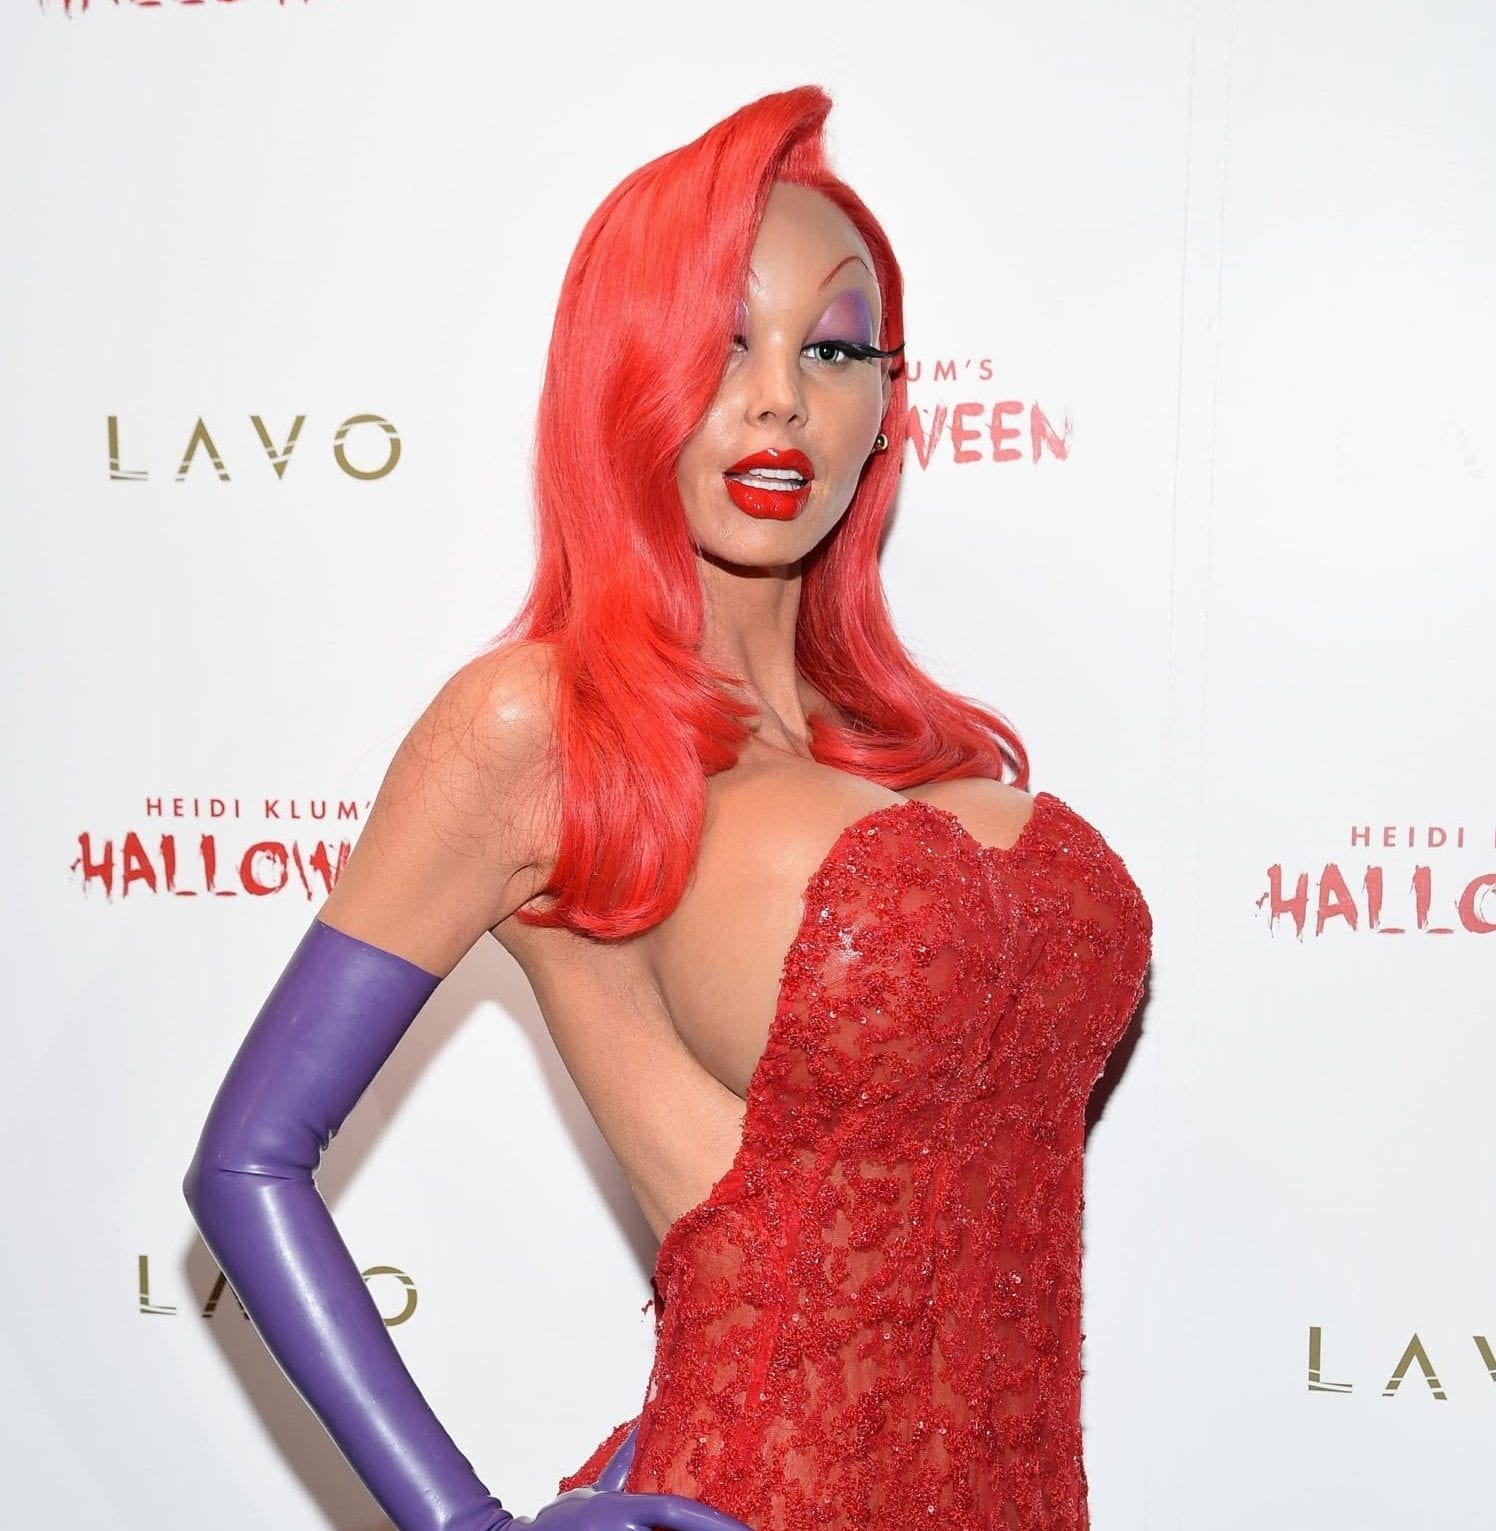 Heidi Klum's 16th Annual Halloween Party sponsored by GSN's Hellevator And SVEDKA Vodka At LAVO New York - Arrivals